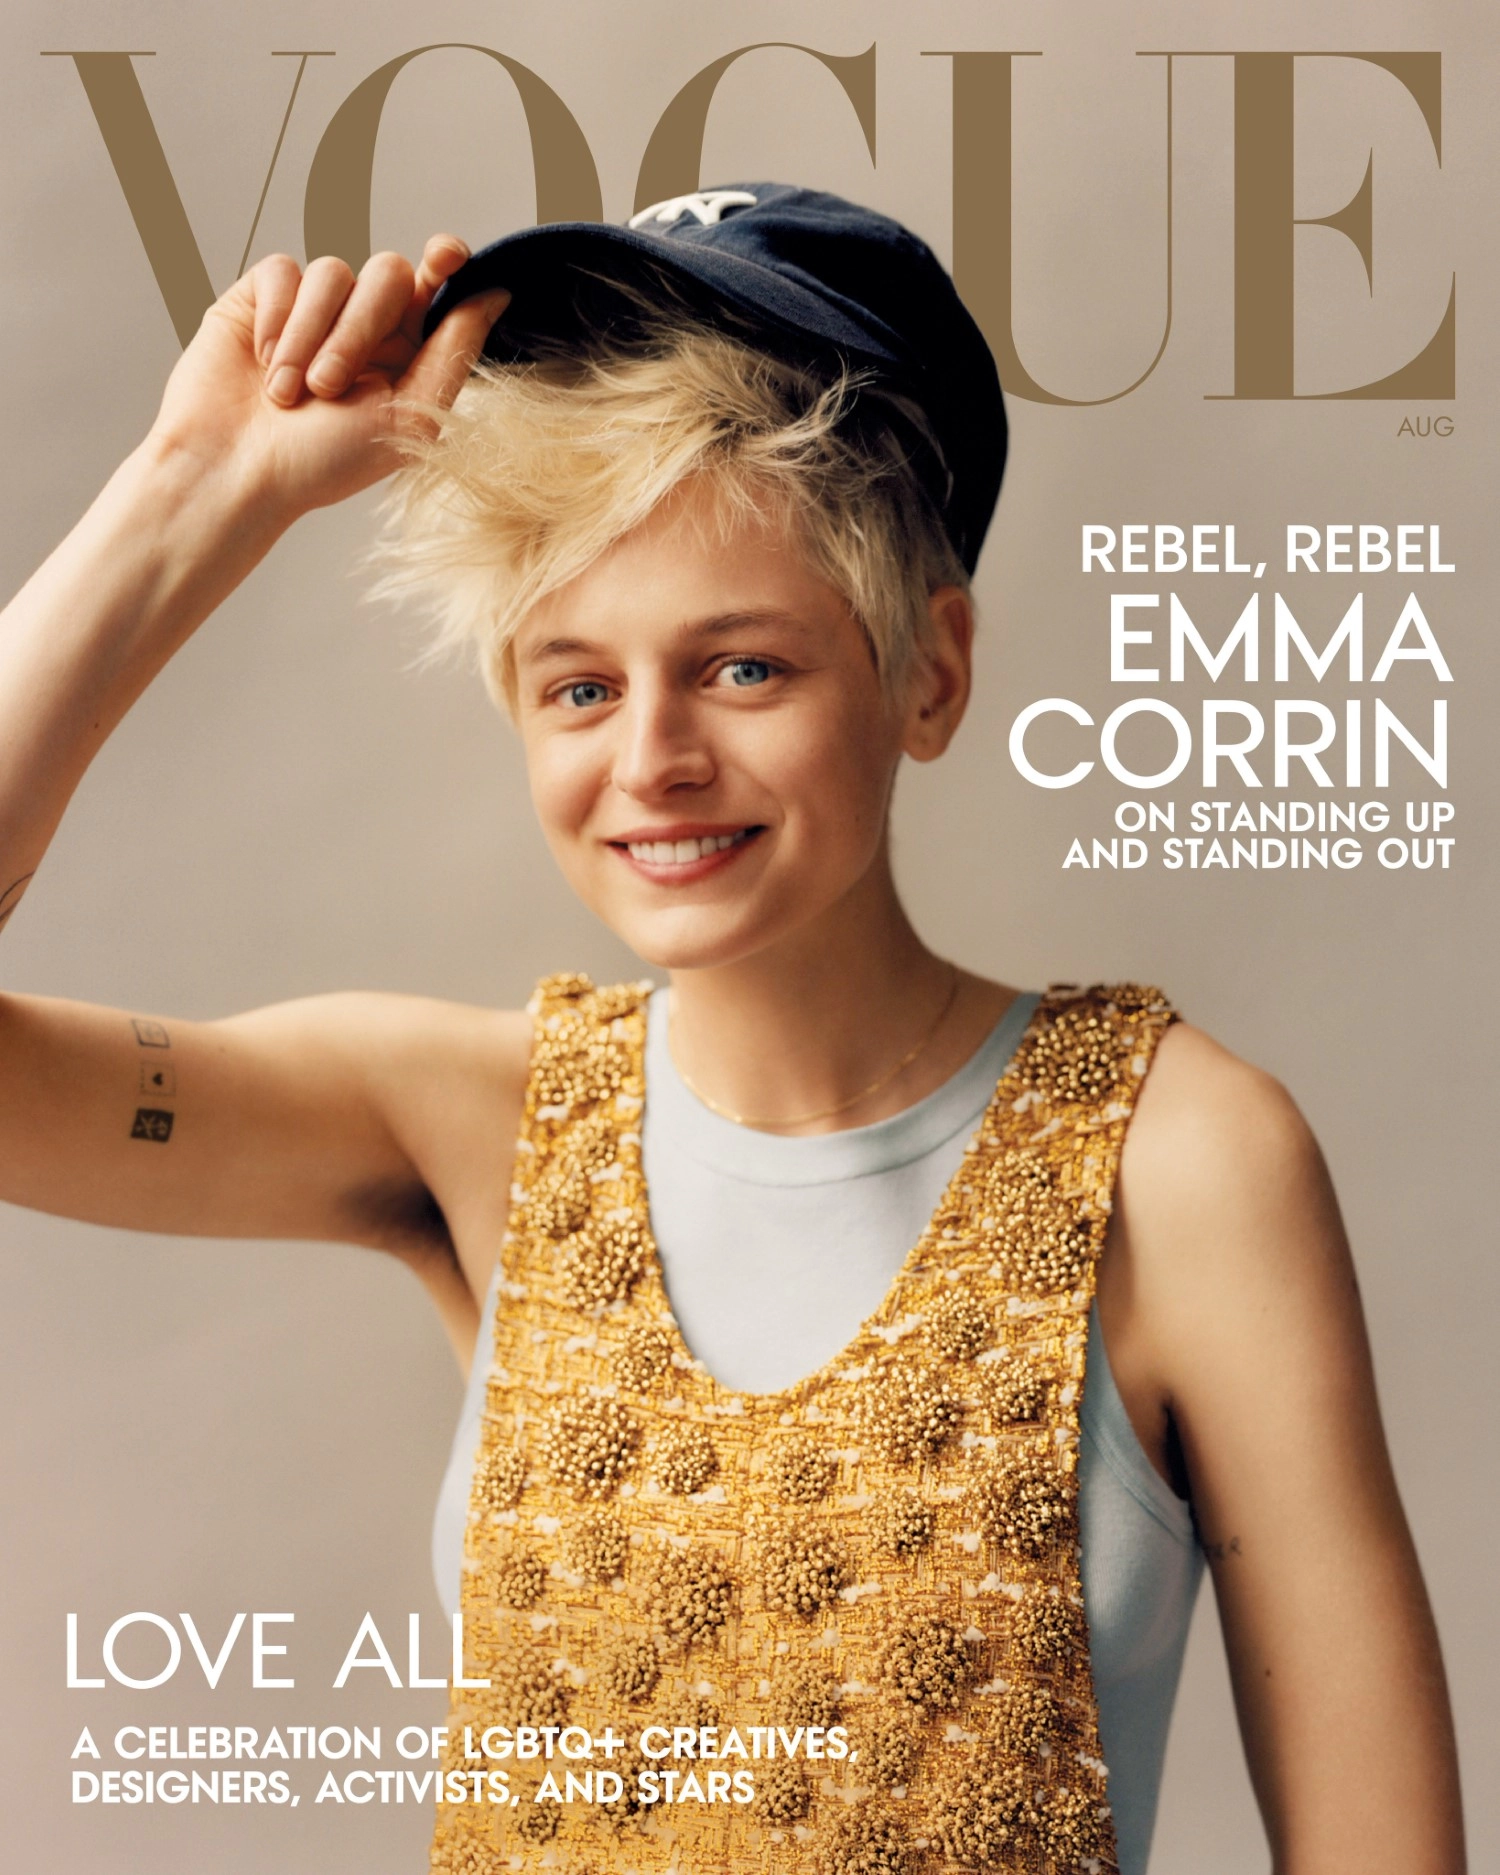 Emma Corrin covers Vogue US August 2022 by Jamie Hawkesworth